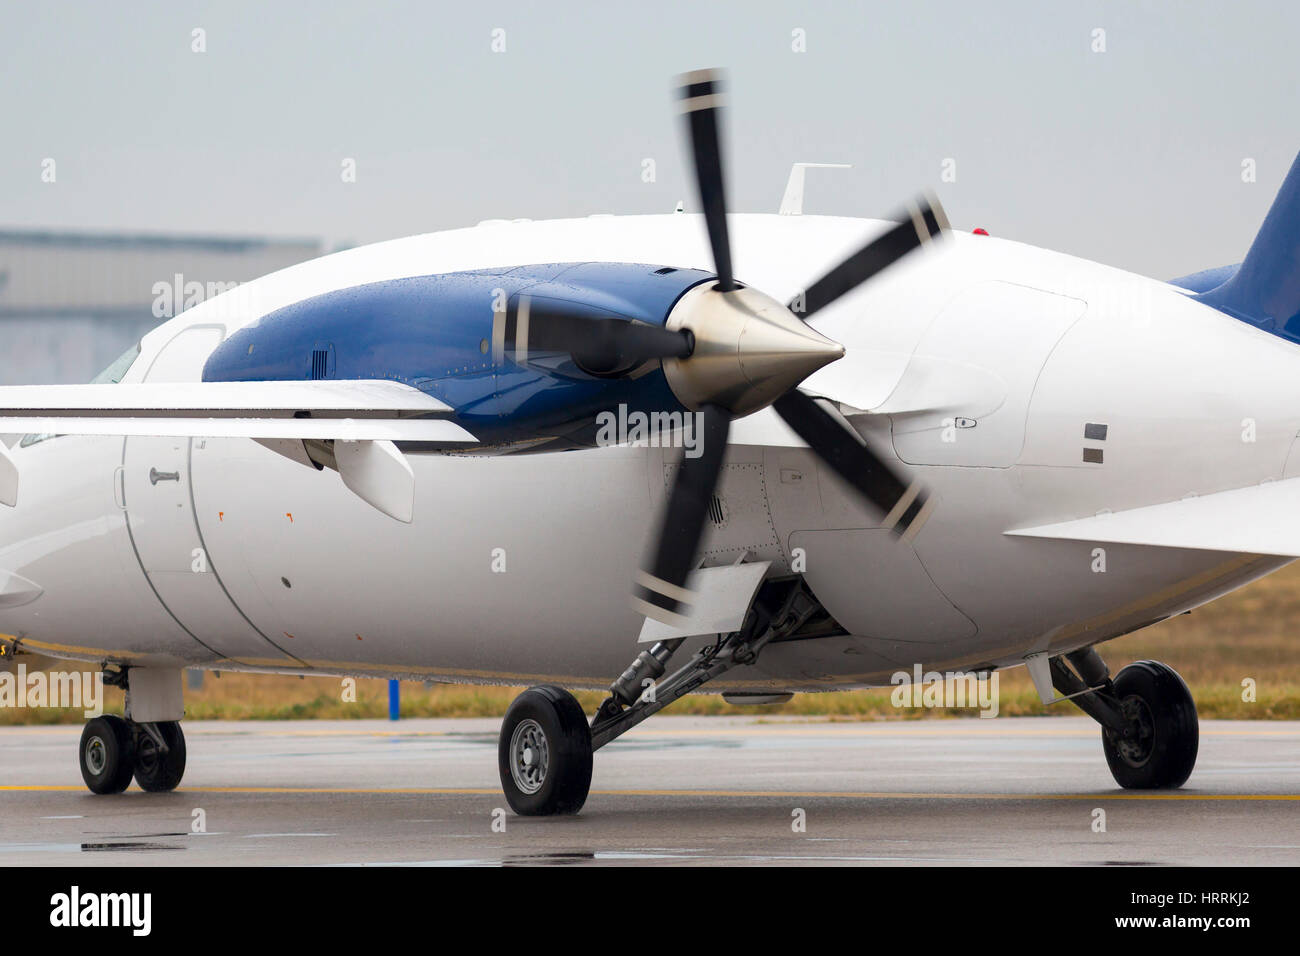 A small private propeller plane seconds before flying out to the runway at Sofia airport. Stock Photo